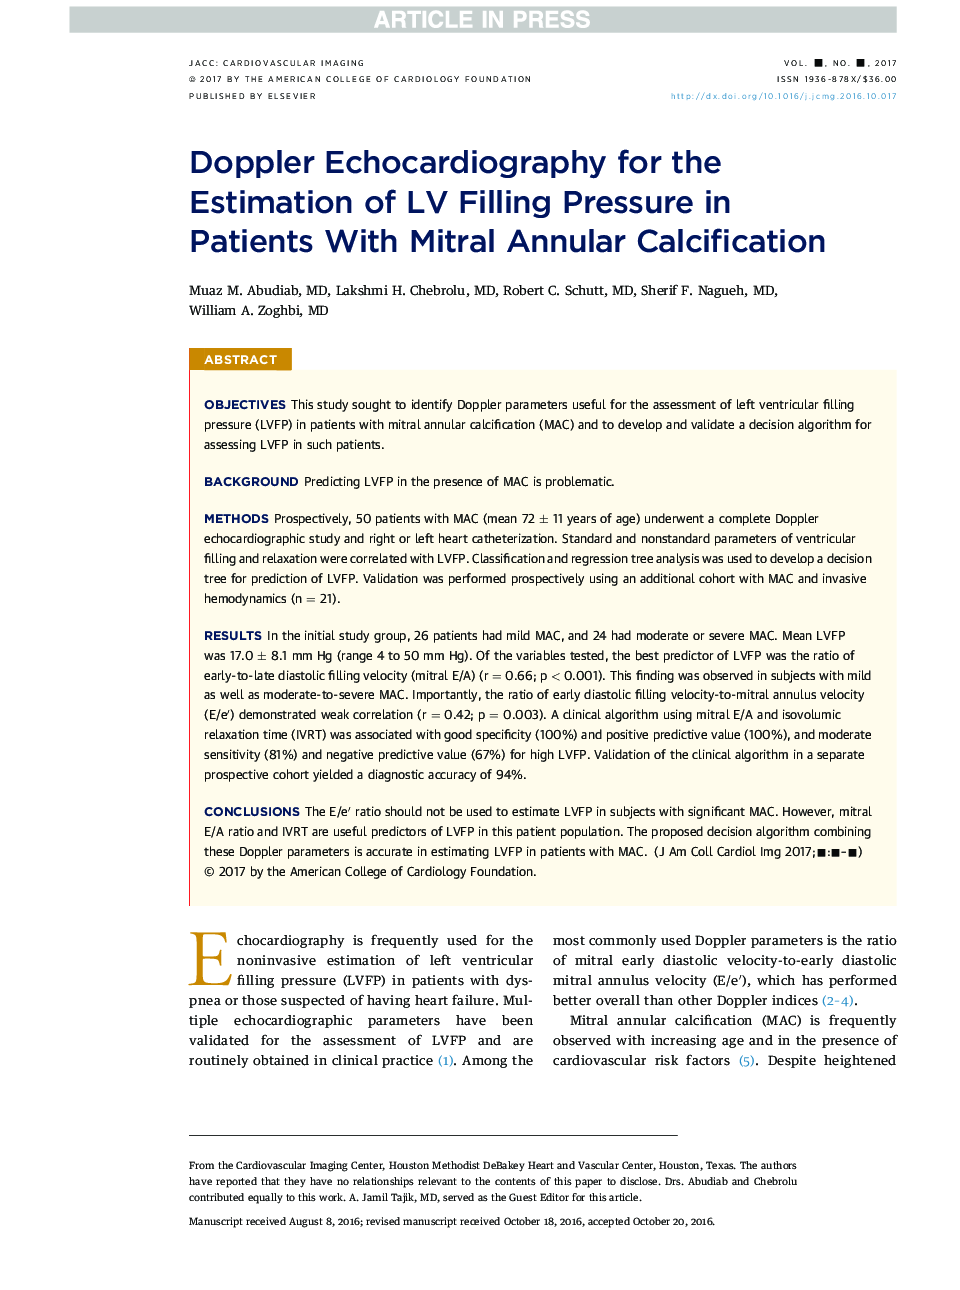 Doppler Echocardiography for the EstimationÂ ofÂ LV Filling Pressure in Patients WithÂ MitralÂ AnnularÂ Calcification